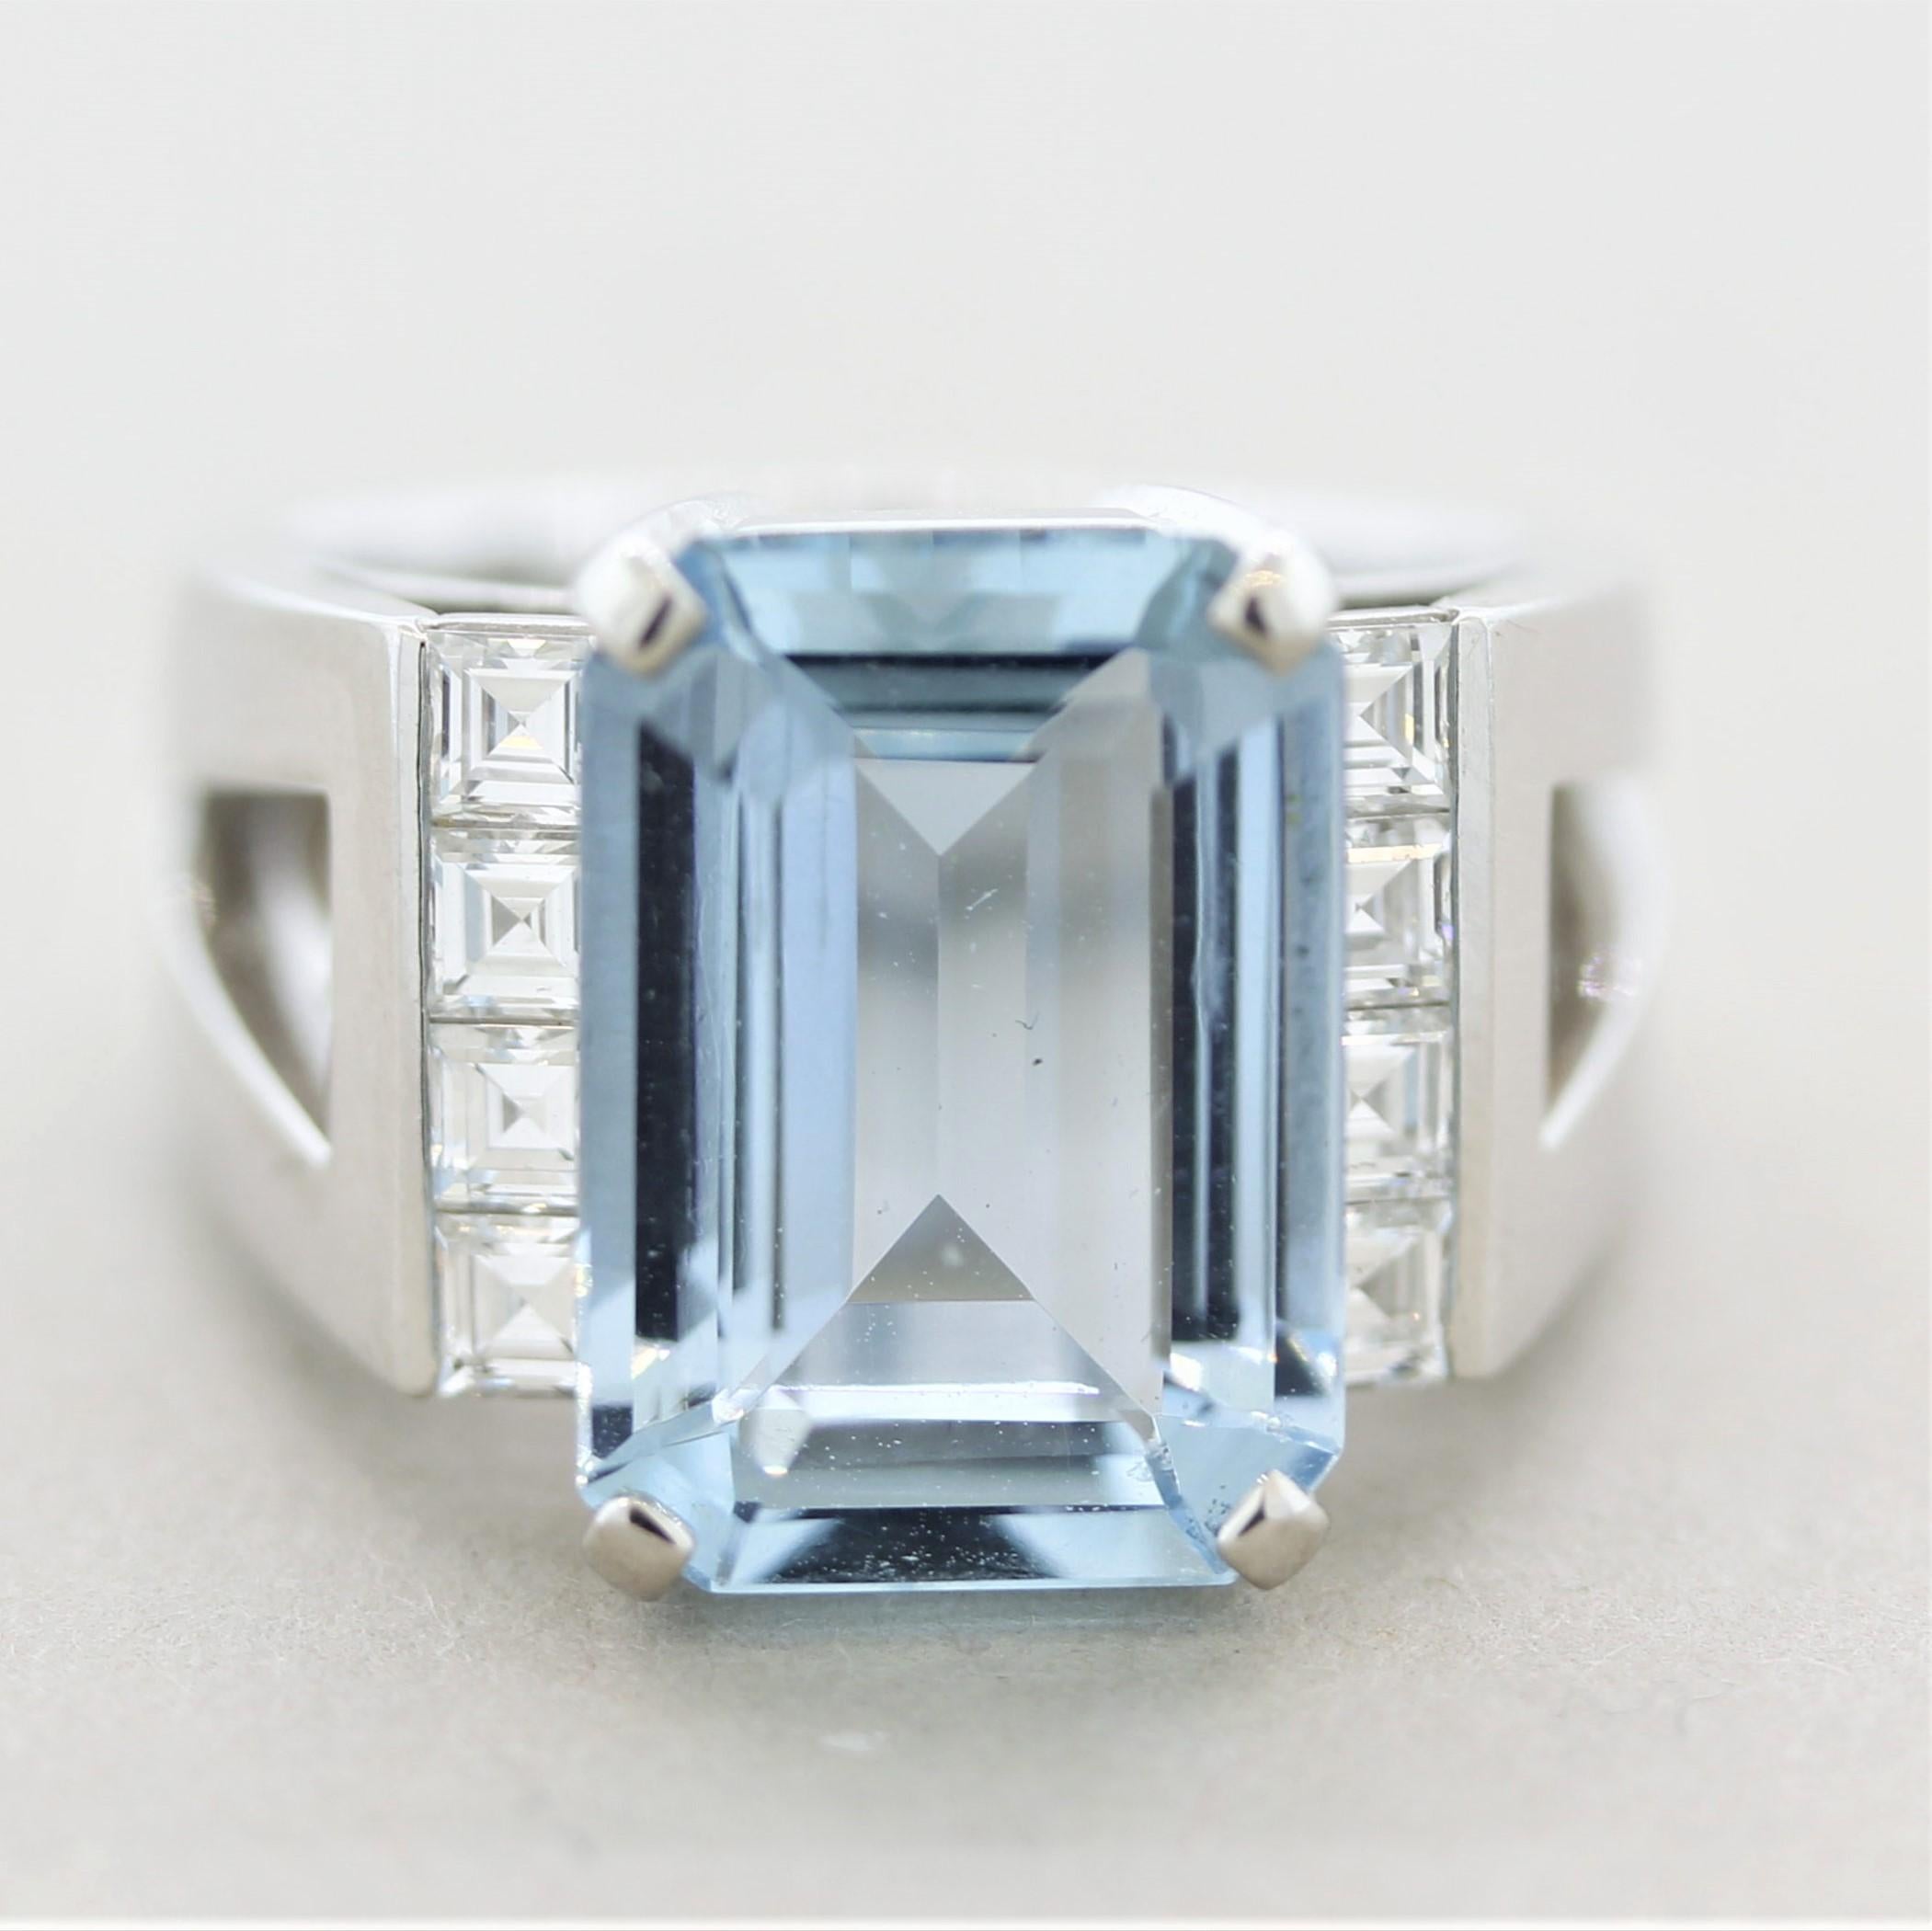 A superbly crafted gemstone ring featuring a classic 5 carat aquamarine with a bright open sea-blue color. It is accented by 8 asscher-cut diamonds channel-set on its sides and weighing 0.50 carats. The ring itself is expertly crafted as it weighs